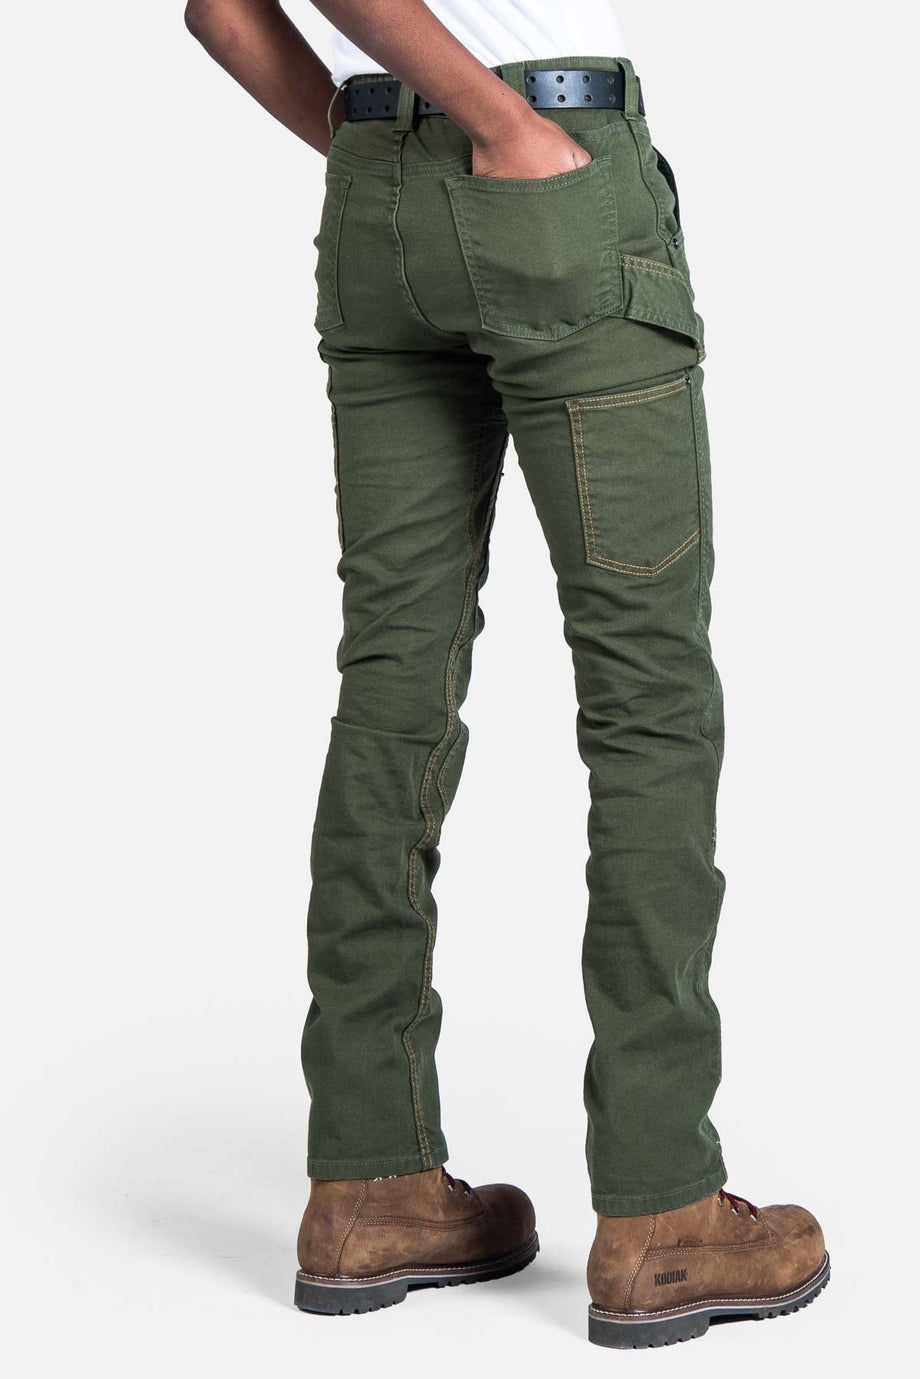 The Maven Slim Pants by Dovetail Workwear [Review] – Adventure Rig